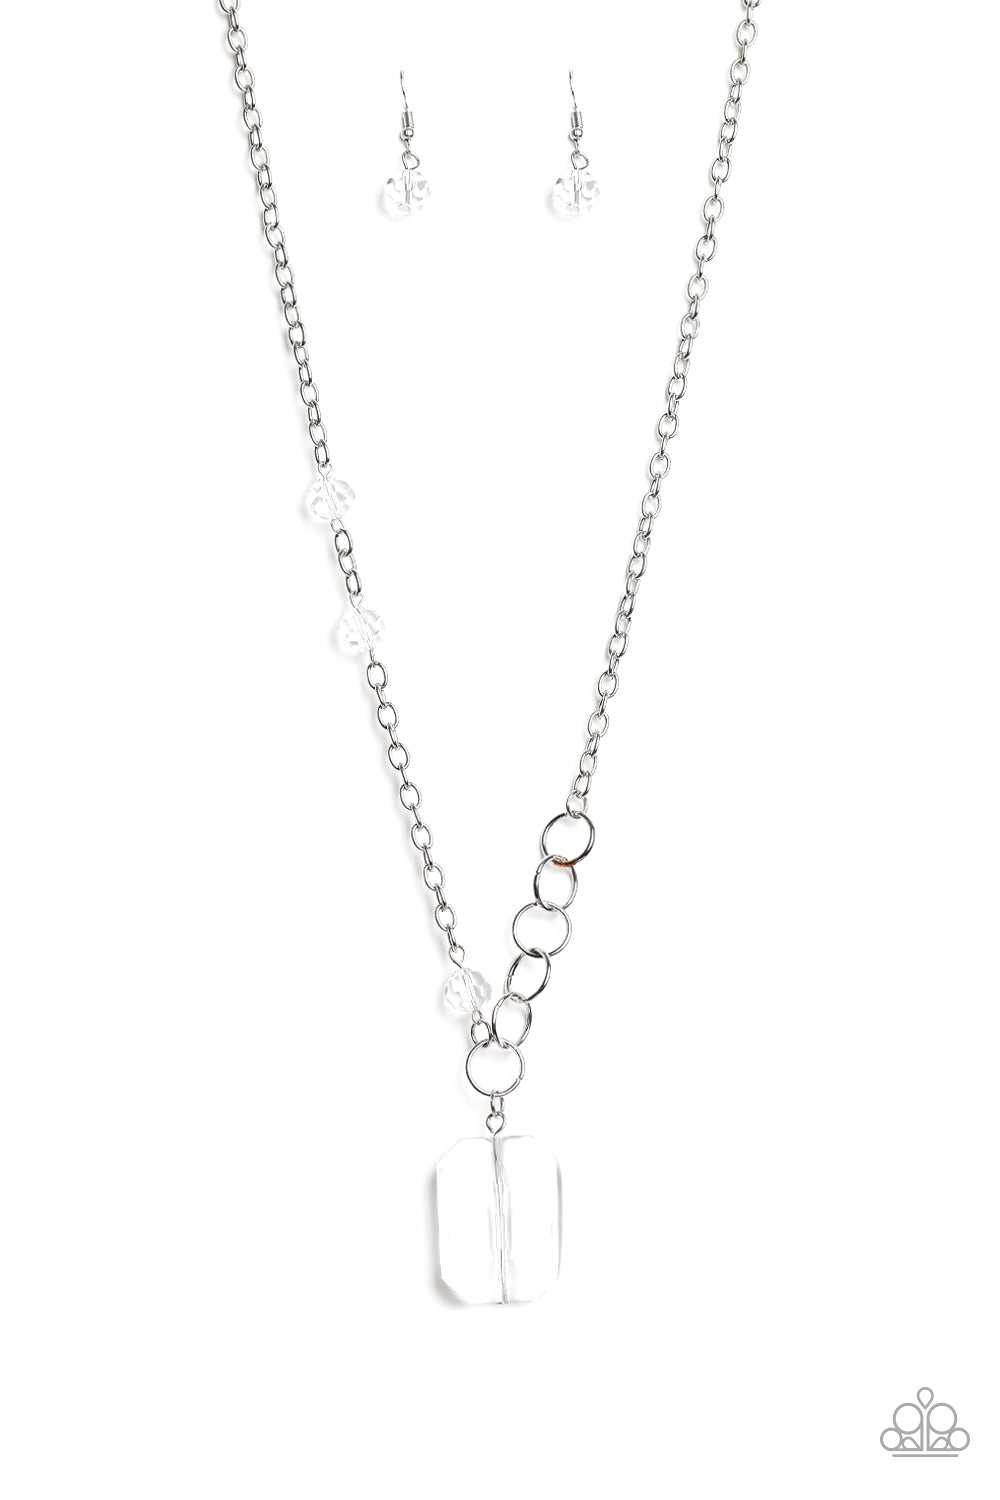 Never A Dull Moment Necklace__White